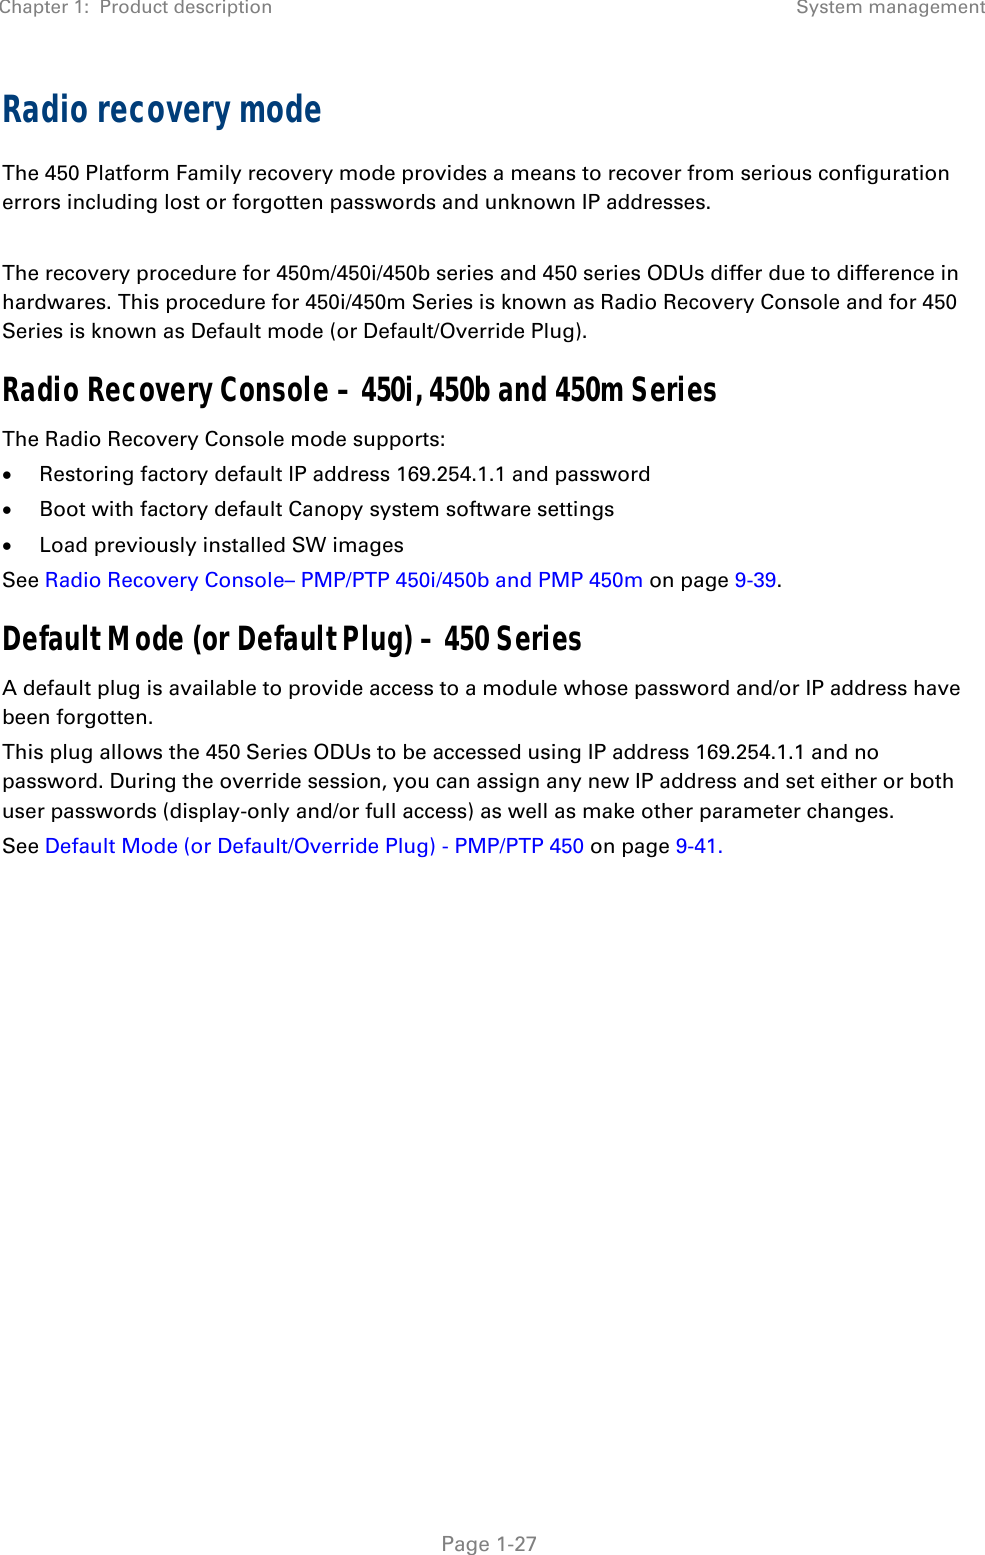 Chapter 1:  Product description System management   Page 1-27 Radio recovery mode  The 450 Platform Family recovery mode provides a means to recover from serious configuration errors including lost or forgotten passwords and unknown IP addresses.  The recovery procedure for 450m/450i/450b series and 450 series ODUs differ due to difference in hardwares. This procedure for 450i/450m Series is known as Radio Recovery Console and for 450 Series is known as Default mode (or Default/Override Plug).  Radio Recovery Console – 450i, 450b and 450m Series  The Radio Recovery Console mode supports:  Restoring factory default IP address 169.254.1.1 and password  Boot with factory default Canopy system software settings  Load previously installed SW images See Radio Recovery Console– PMP/PTP 450i/450b and PMP 450m on page 9-39. Default Mode (or Default Plug) – 450 Series  A default plug is available to provide access to a module whose password and/or IP address have been forgotten.  This plug allows the 450 Series ODUs to be accessed using IP address 169.254.1.1 and no password. During the override session, you can assign any new IP address and set either or both user passwords (display-only and/or full access) as well as make other parameter changes. See Default Mode (or Default/Override Plug) - PMP/PTP 450 on page 9-41.   